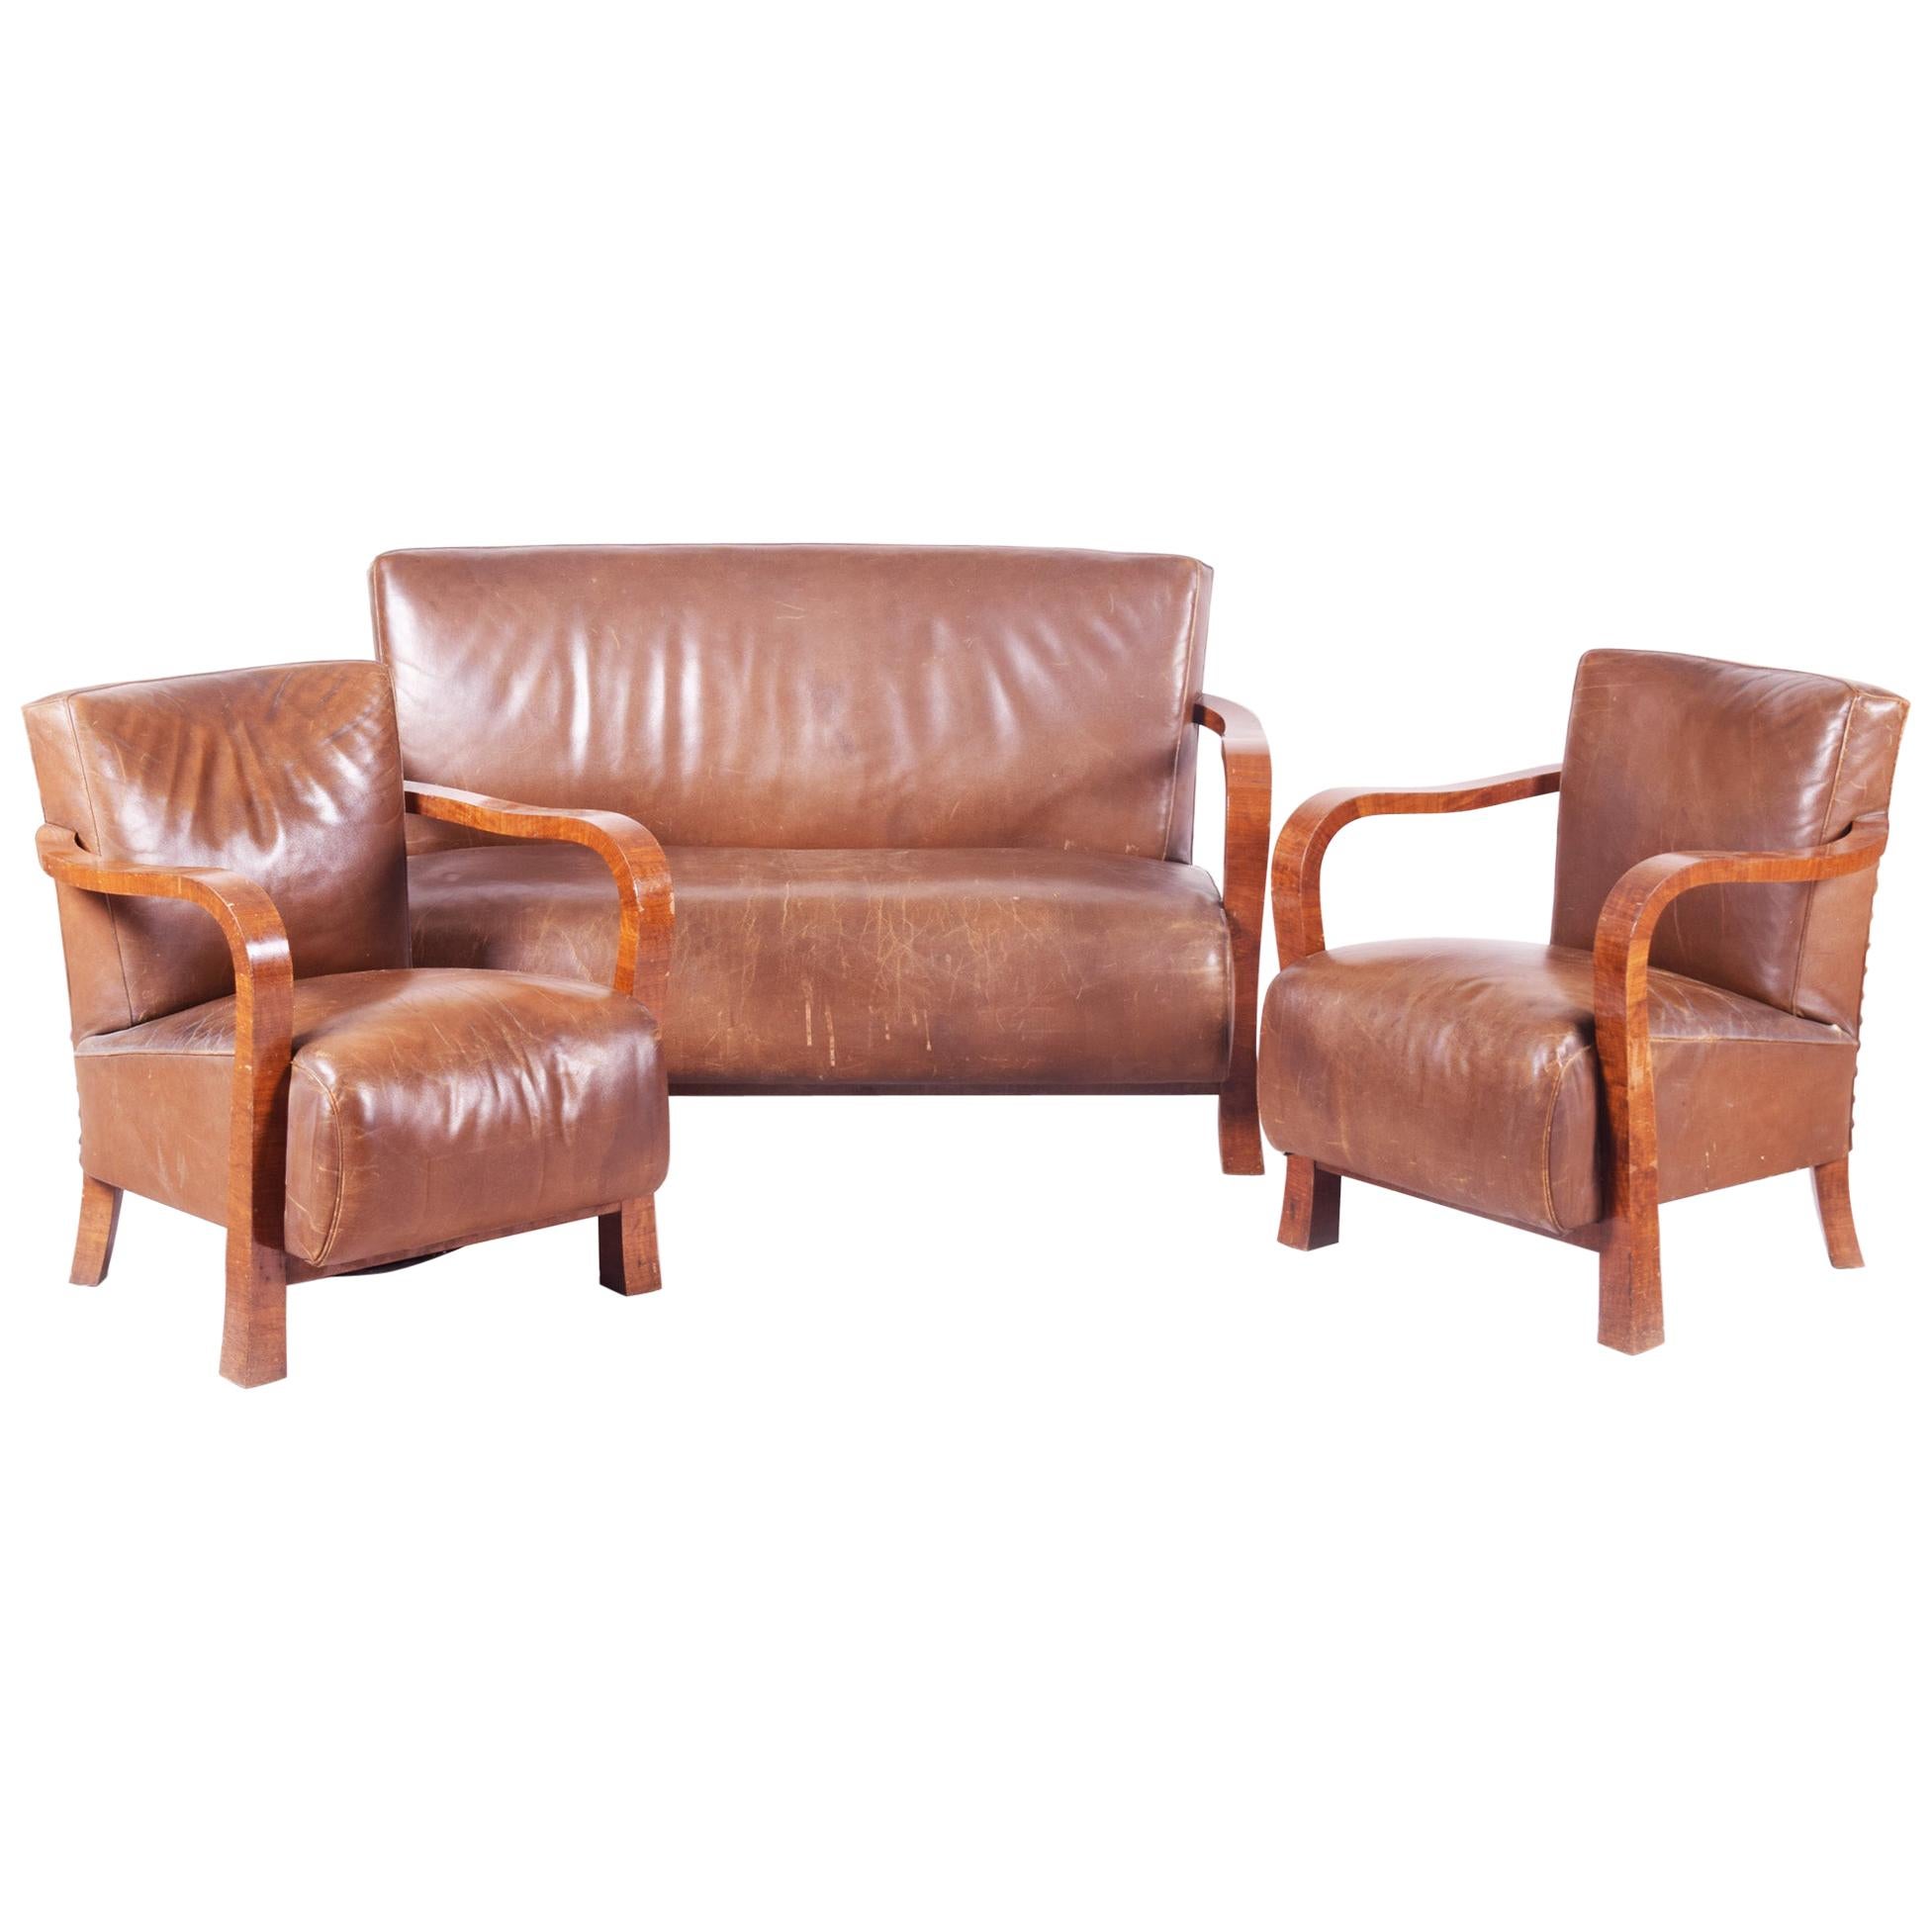 Brown Walnut Art Deco Three-Piece Suite, Preserved Condition and Leather, 1930s